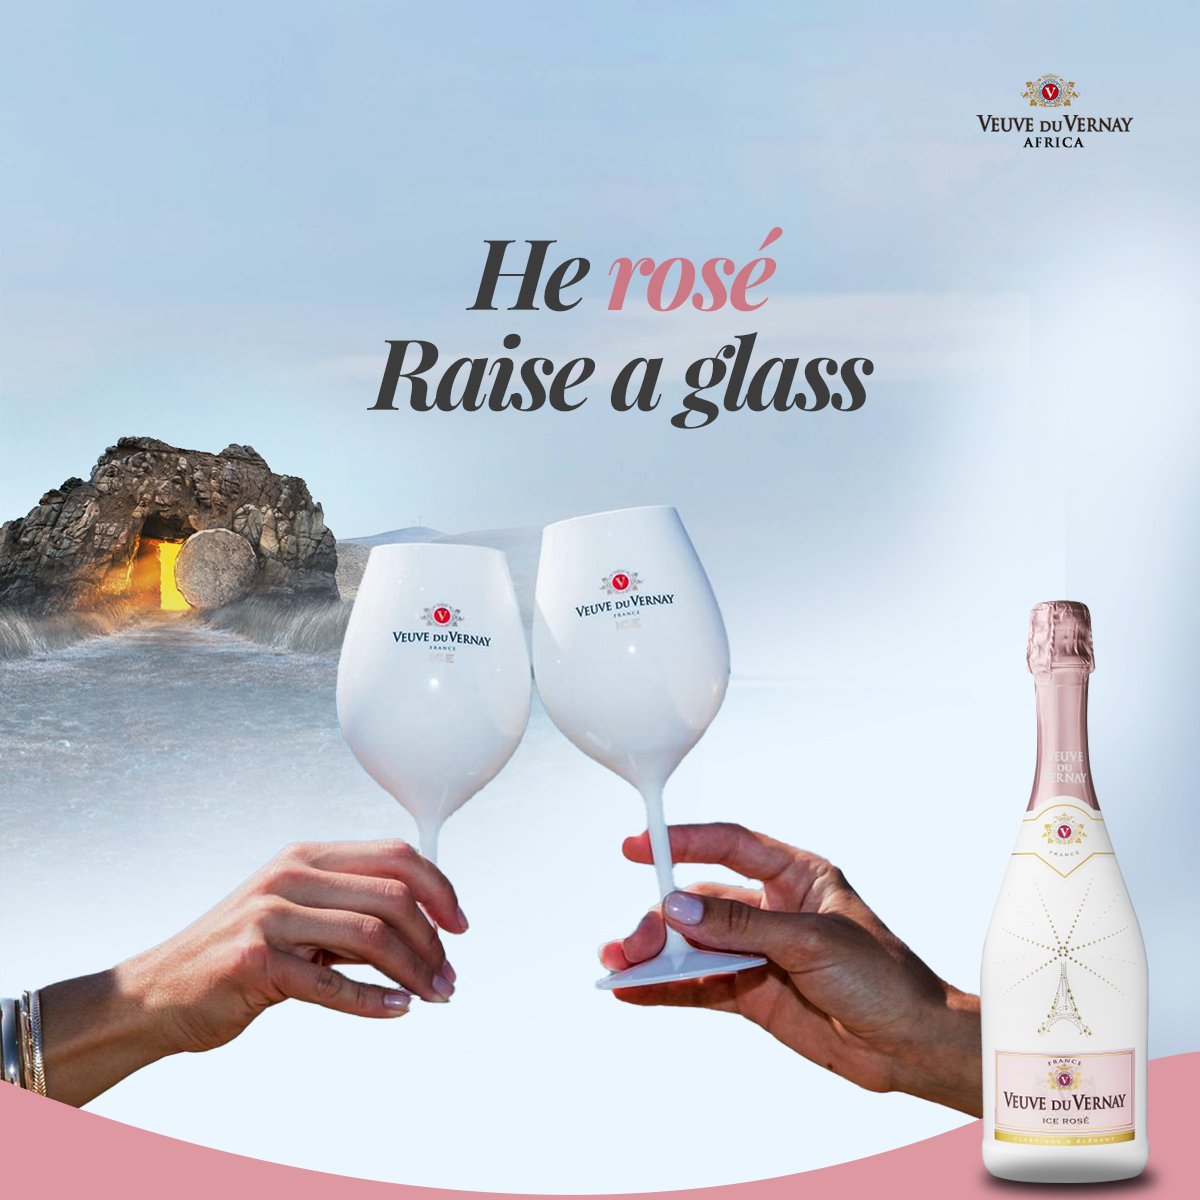 He rosé, and so shall we! 
Let's raise a glass to new beginnings and endless grace. 

Happy Easter!

#HappyEaster #EasterSunday #Easter2024 #Easter #SparklingWine #VeuveDuVernay #ATasteOfFrance